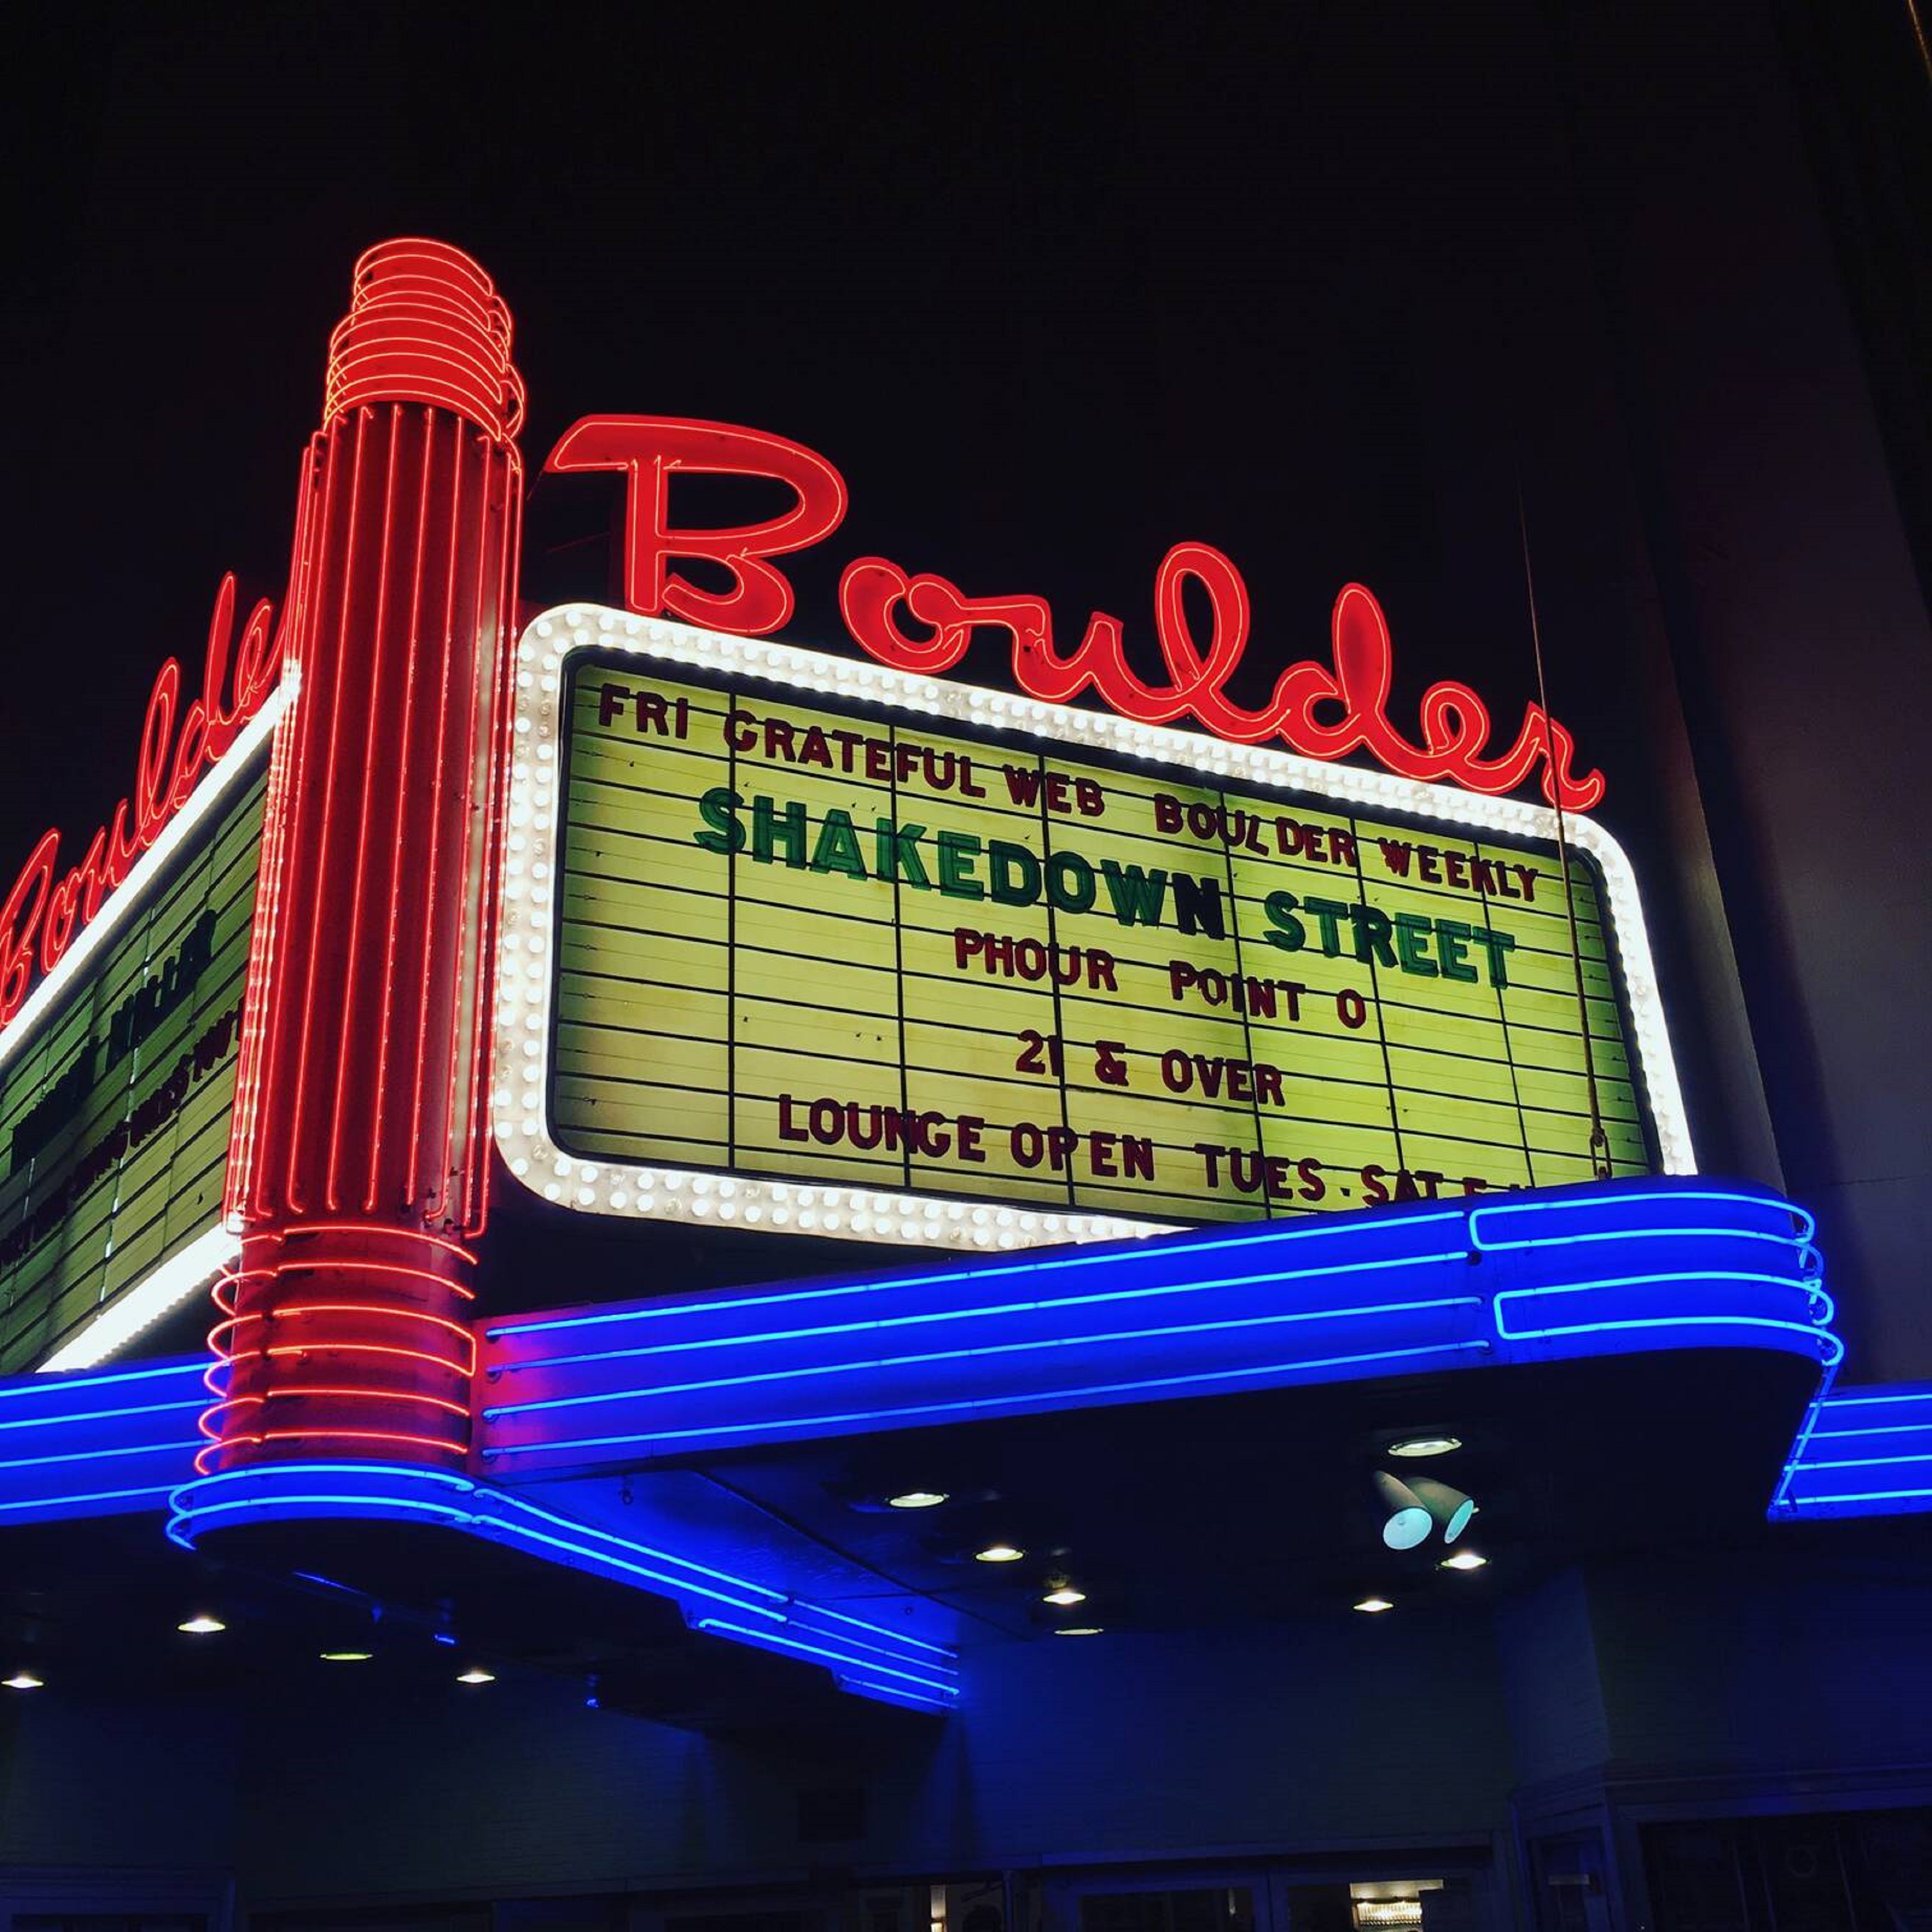 BOULDER THEATER MAKES MAJOR UPGRADES TO SOUND SYSTEM